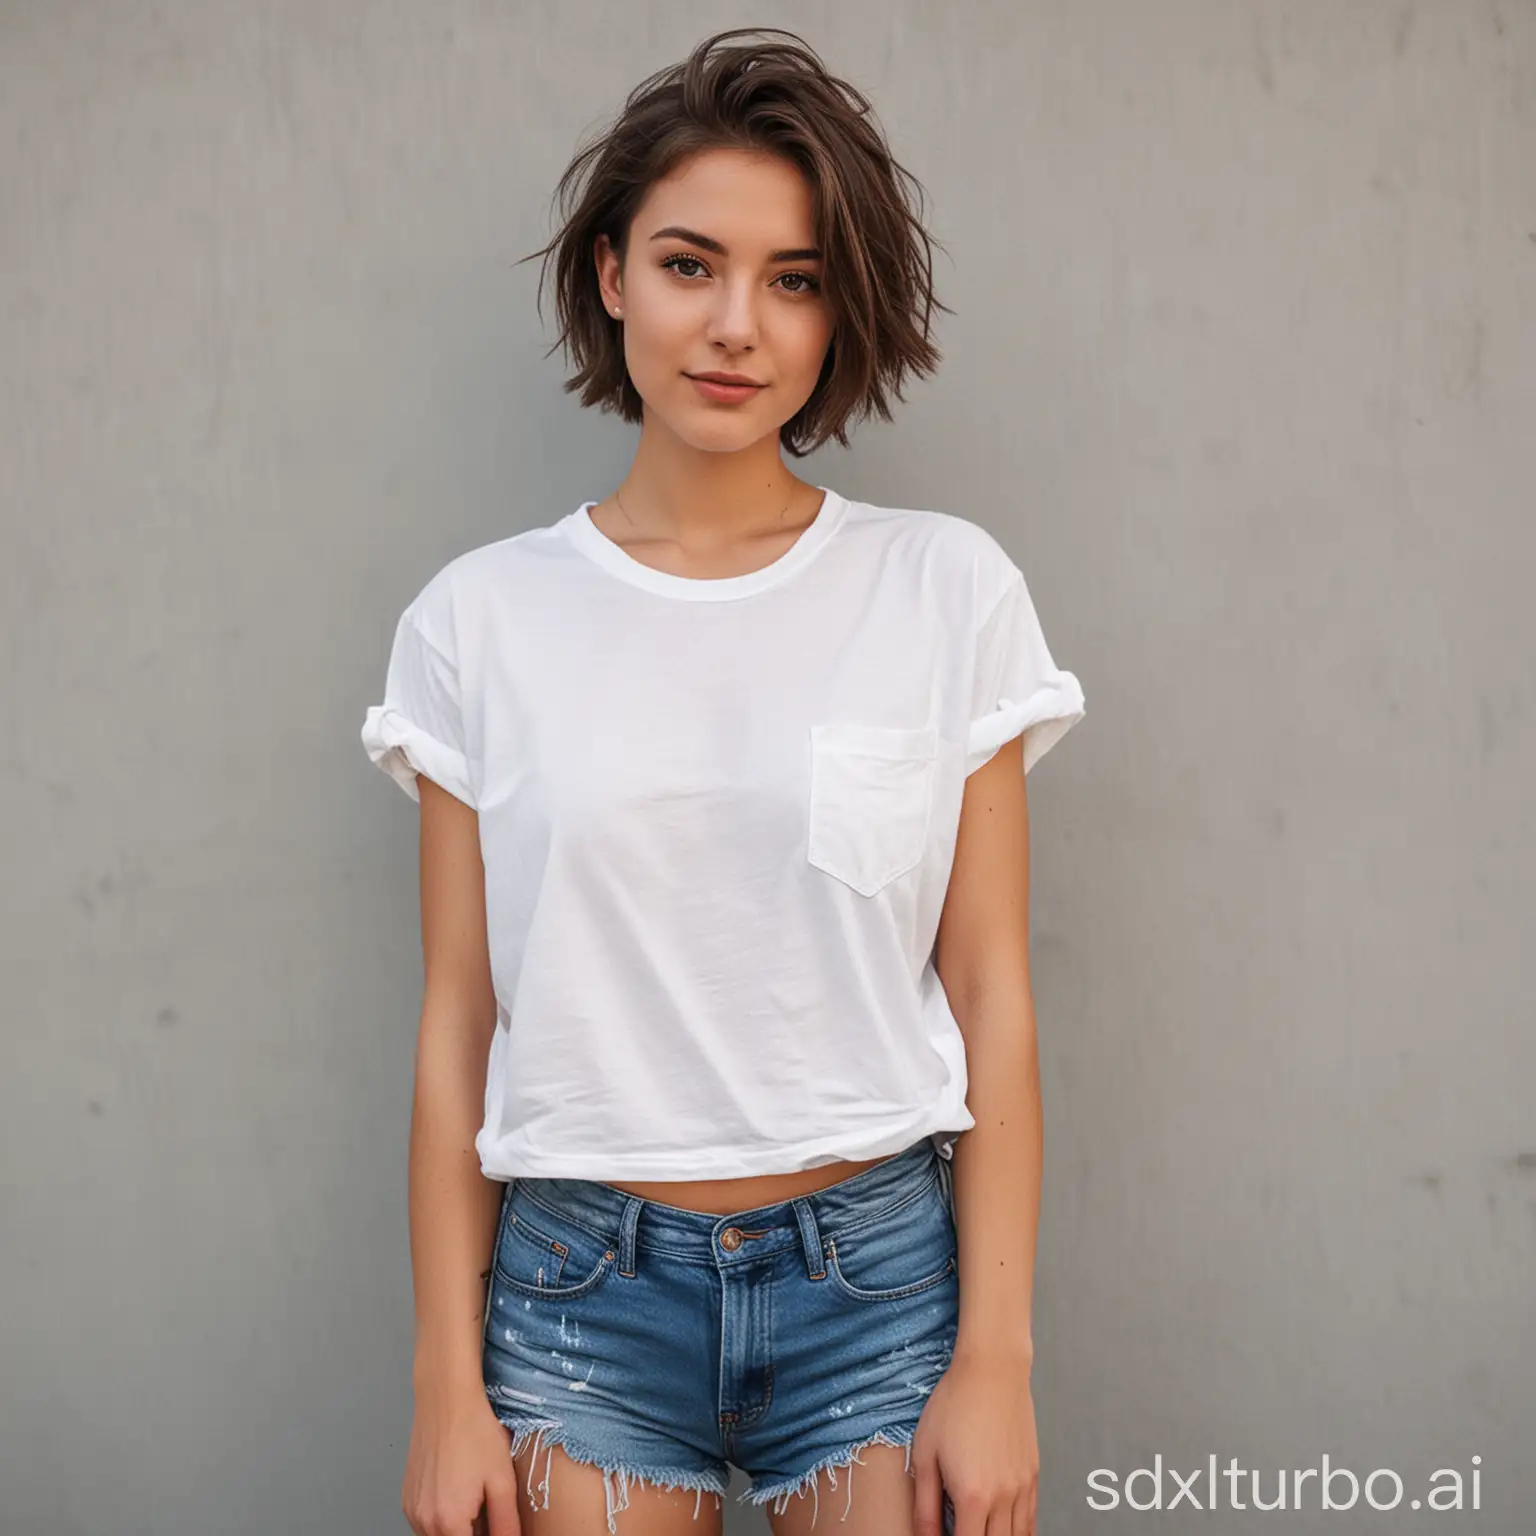 Young-Woman-in-Casual-Attire-and-Short-Hair